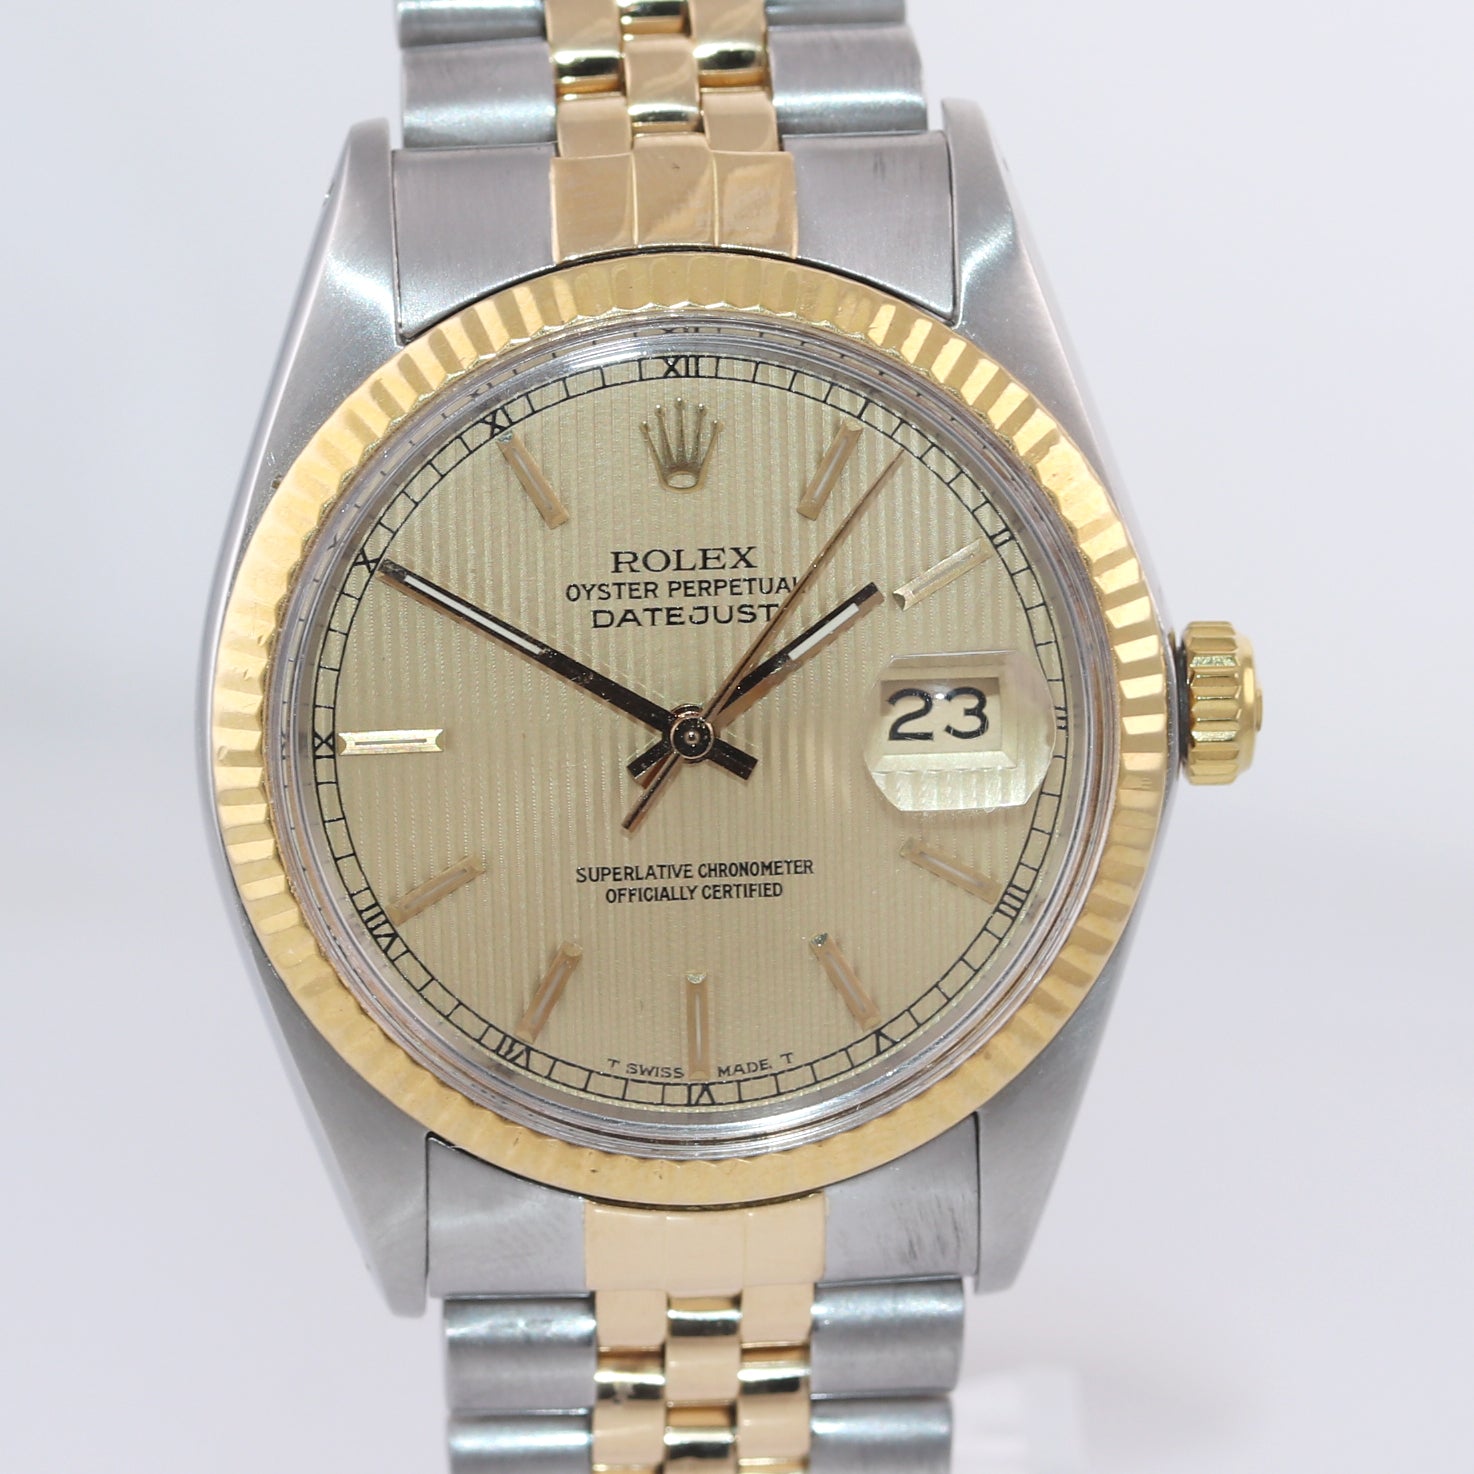 PAPERS Champagne Tapestry Rolex DateJust 16013 Two Tone 18k Yellow Gold Jubilee